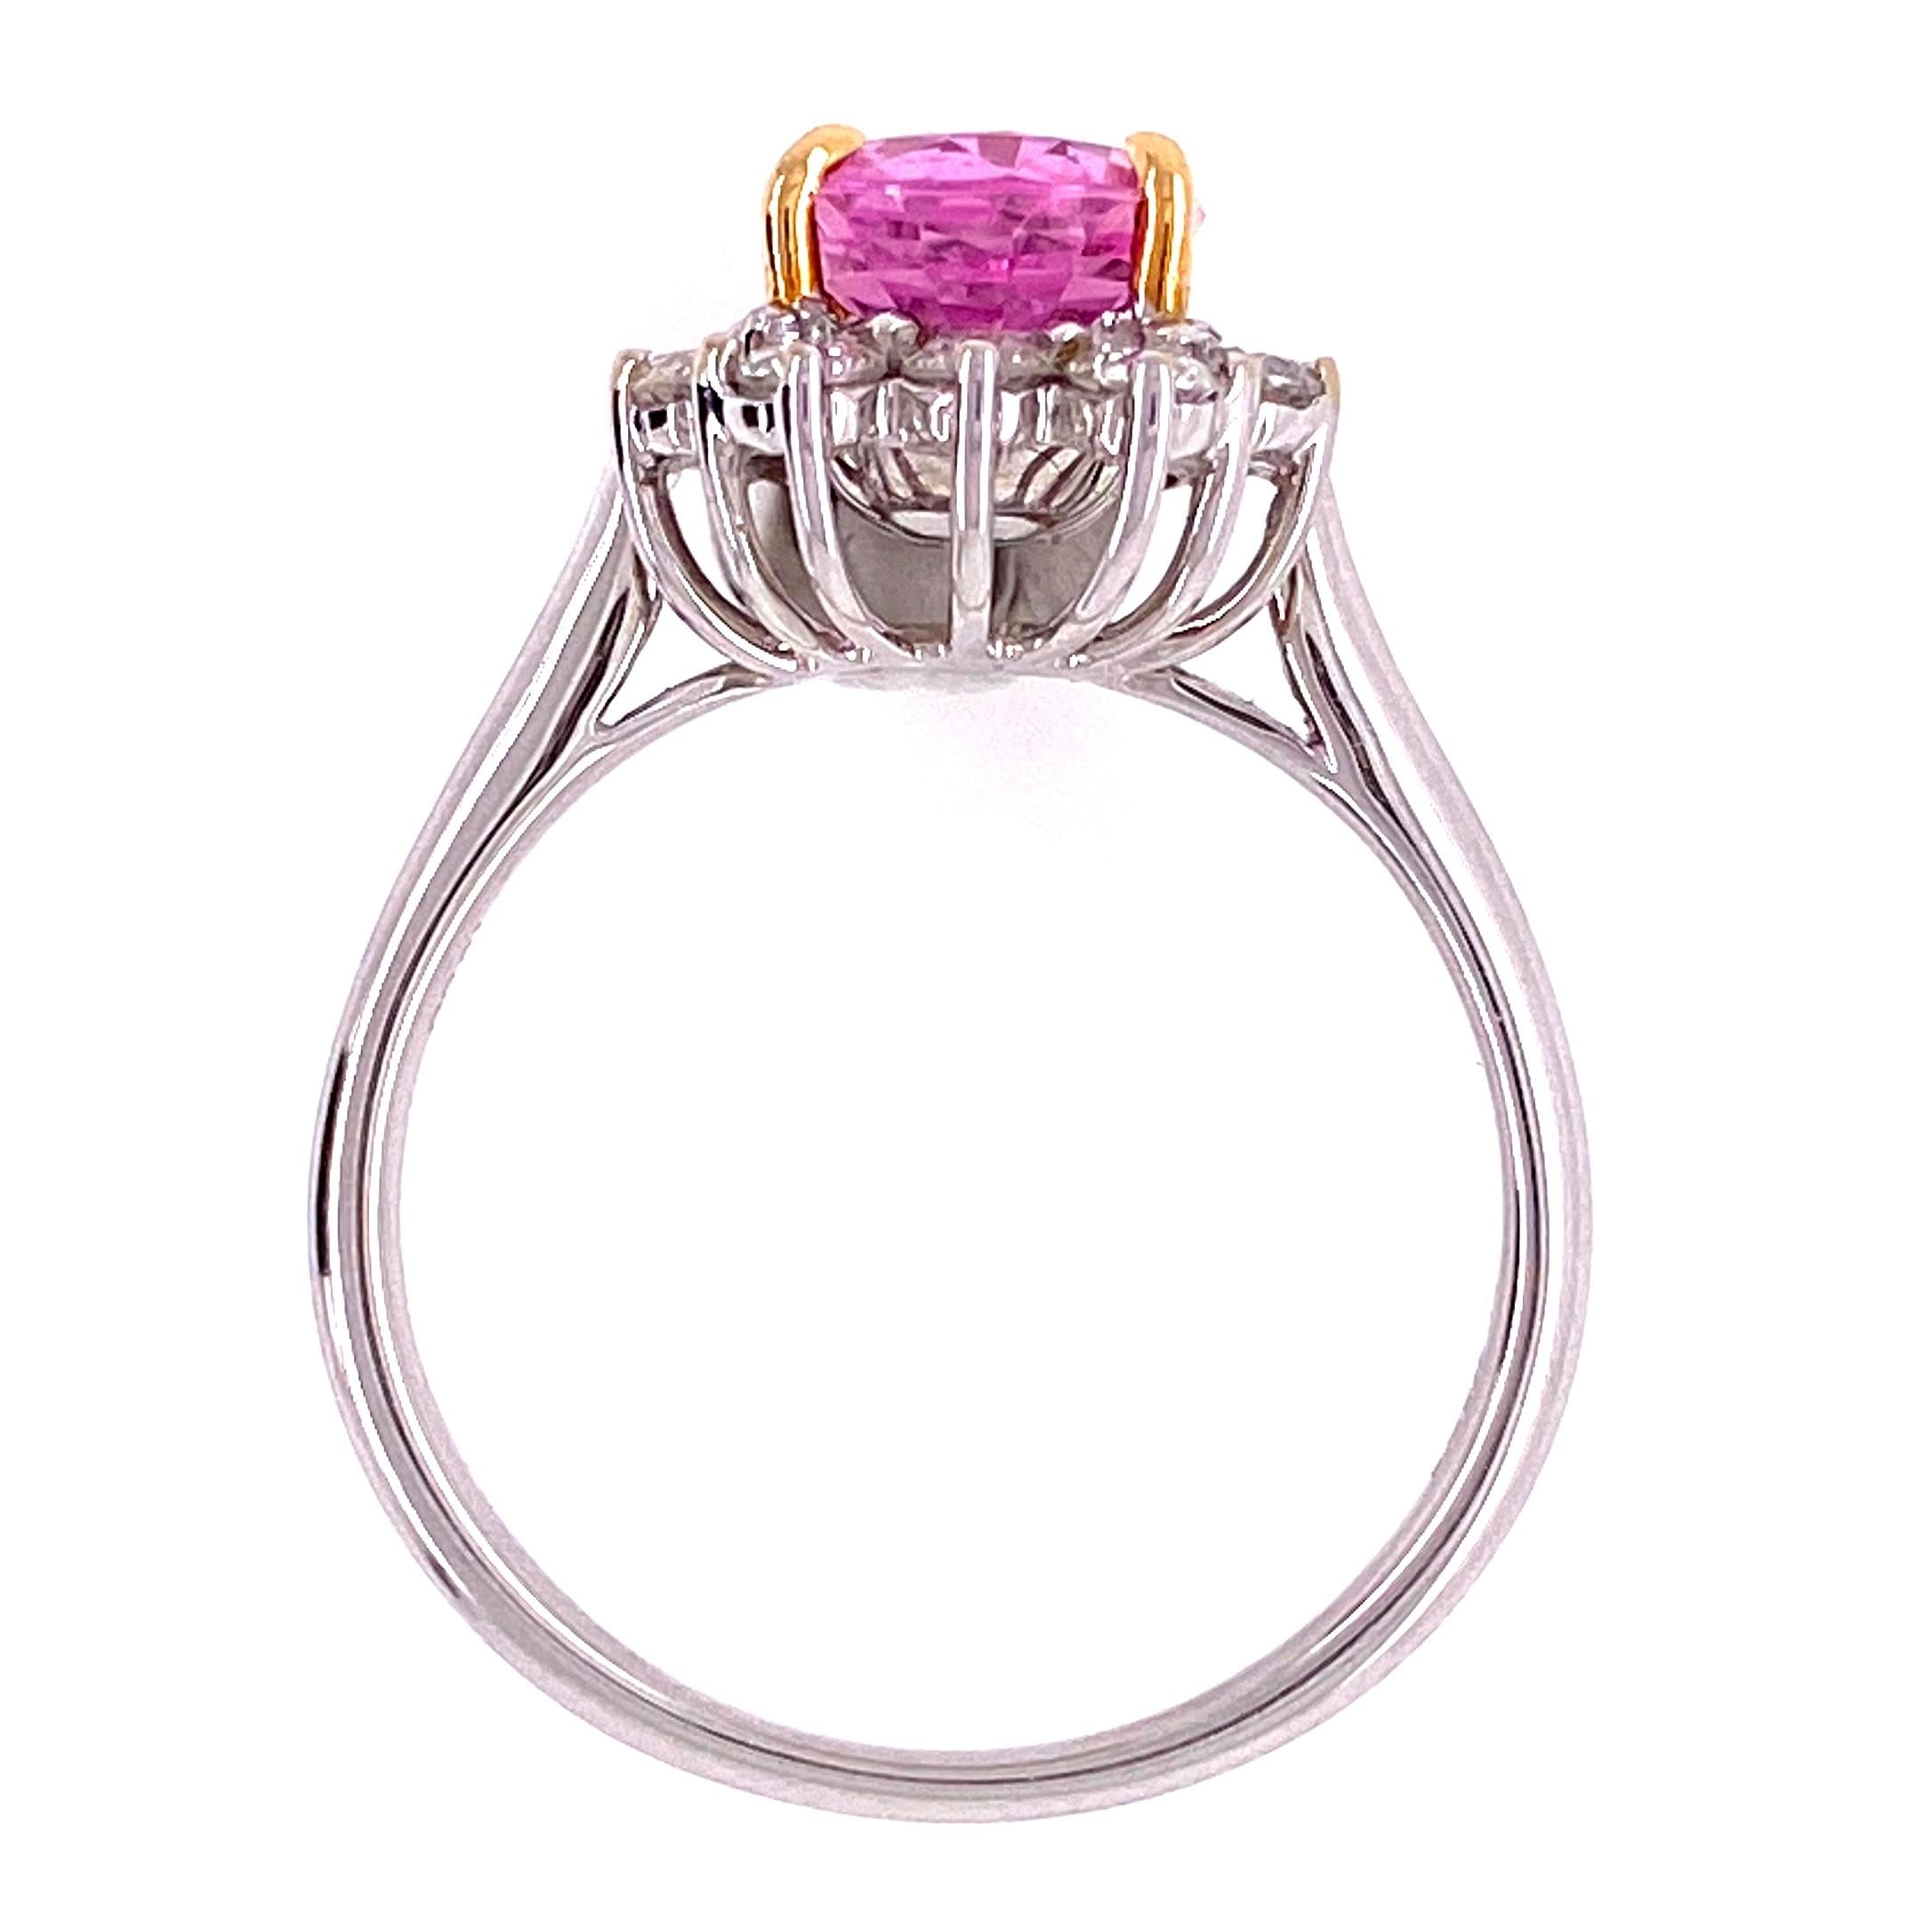 Women's Vintage 2.32 Carat Pink Sapphire Diamond Gold Cocktail Ring Estate Fine Jewelry For Sale